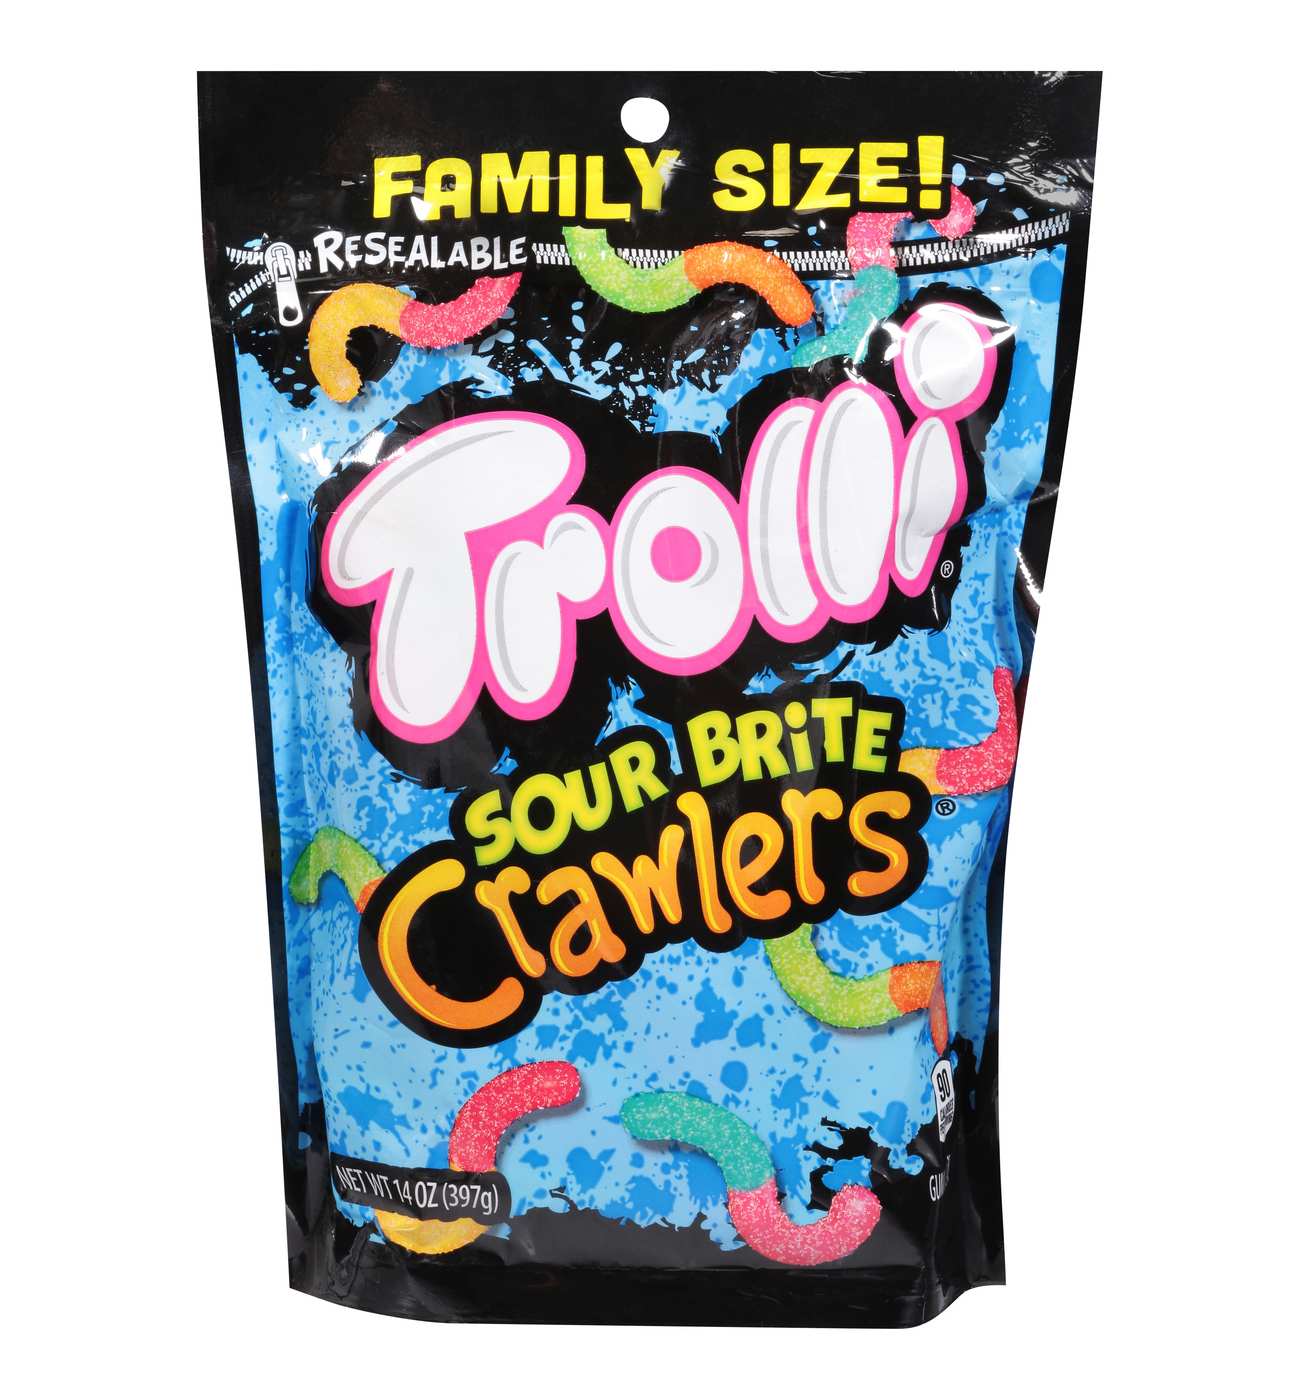 Trolli Sour Brite Crawlers Candy - Family Size; image 1 of 2